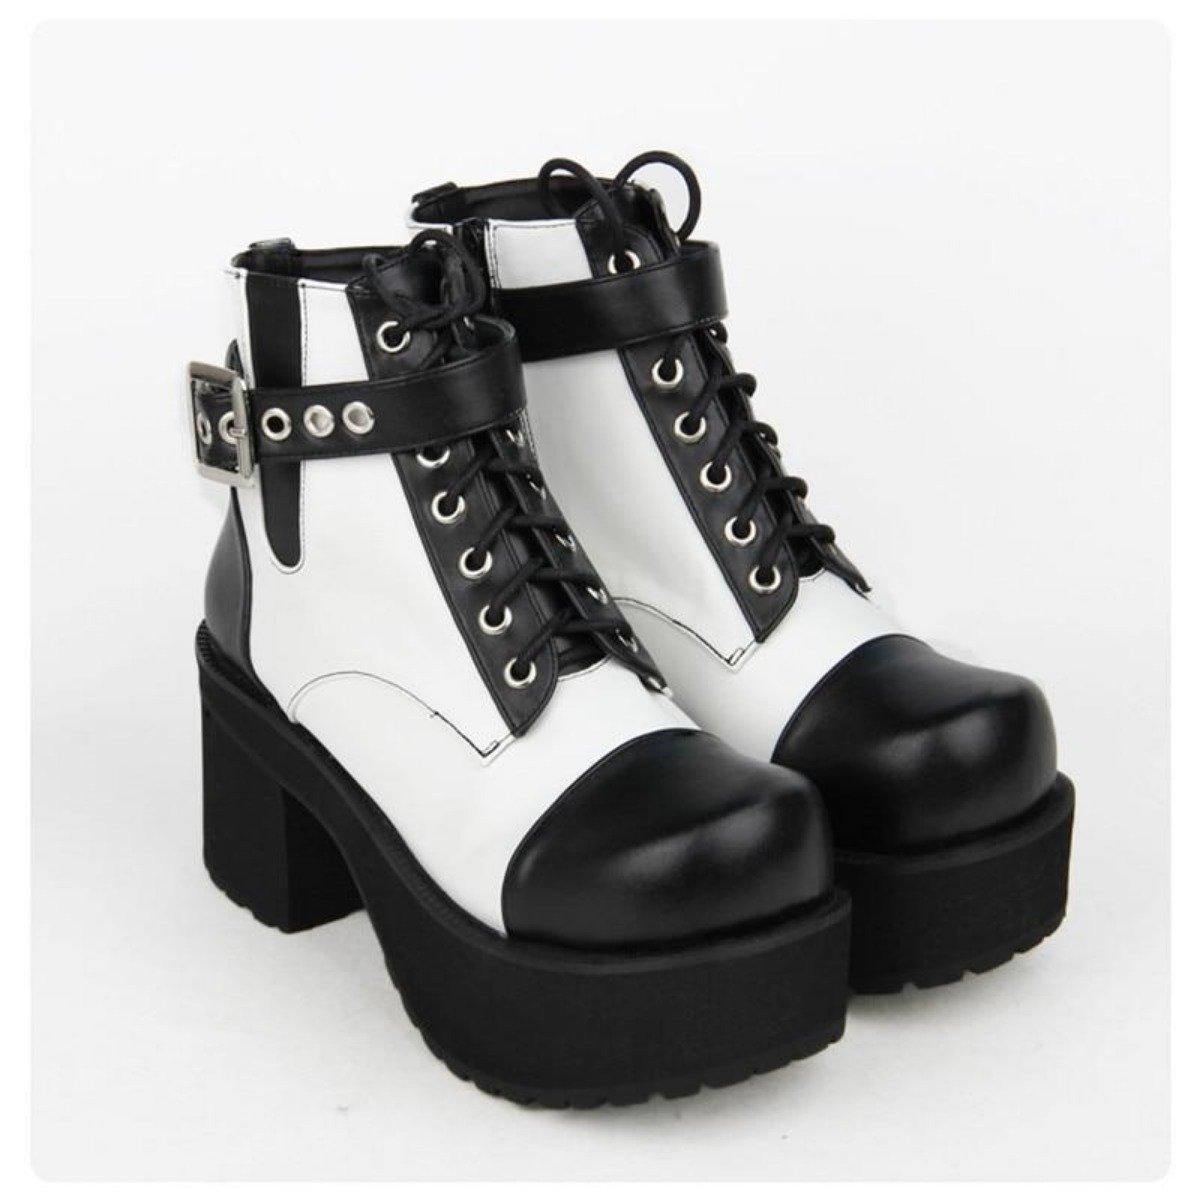 Women's Gothic Punk Ankle Boots with Block Heel - American Legend Rider